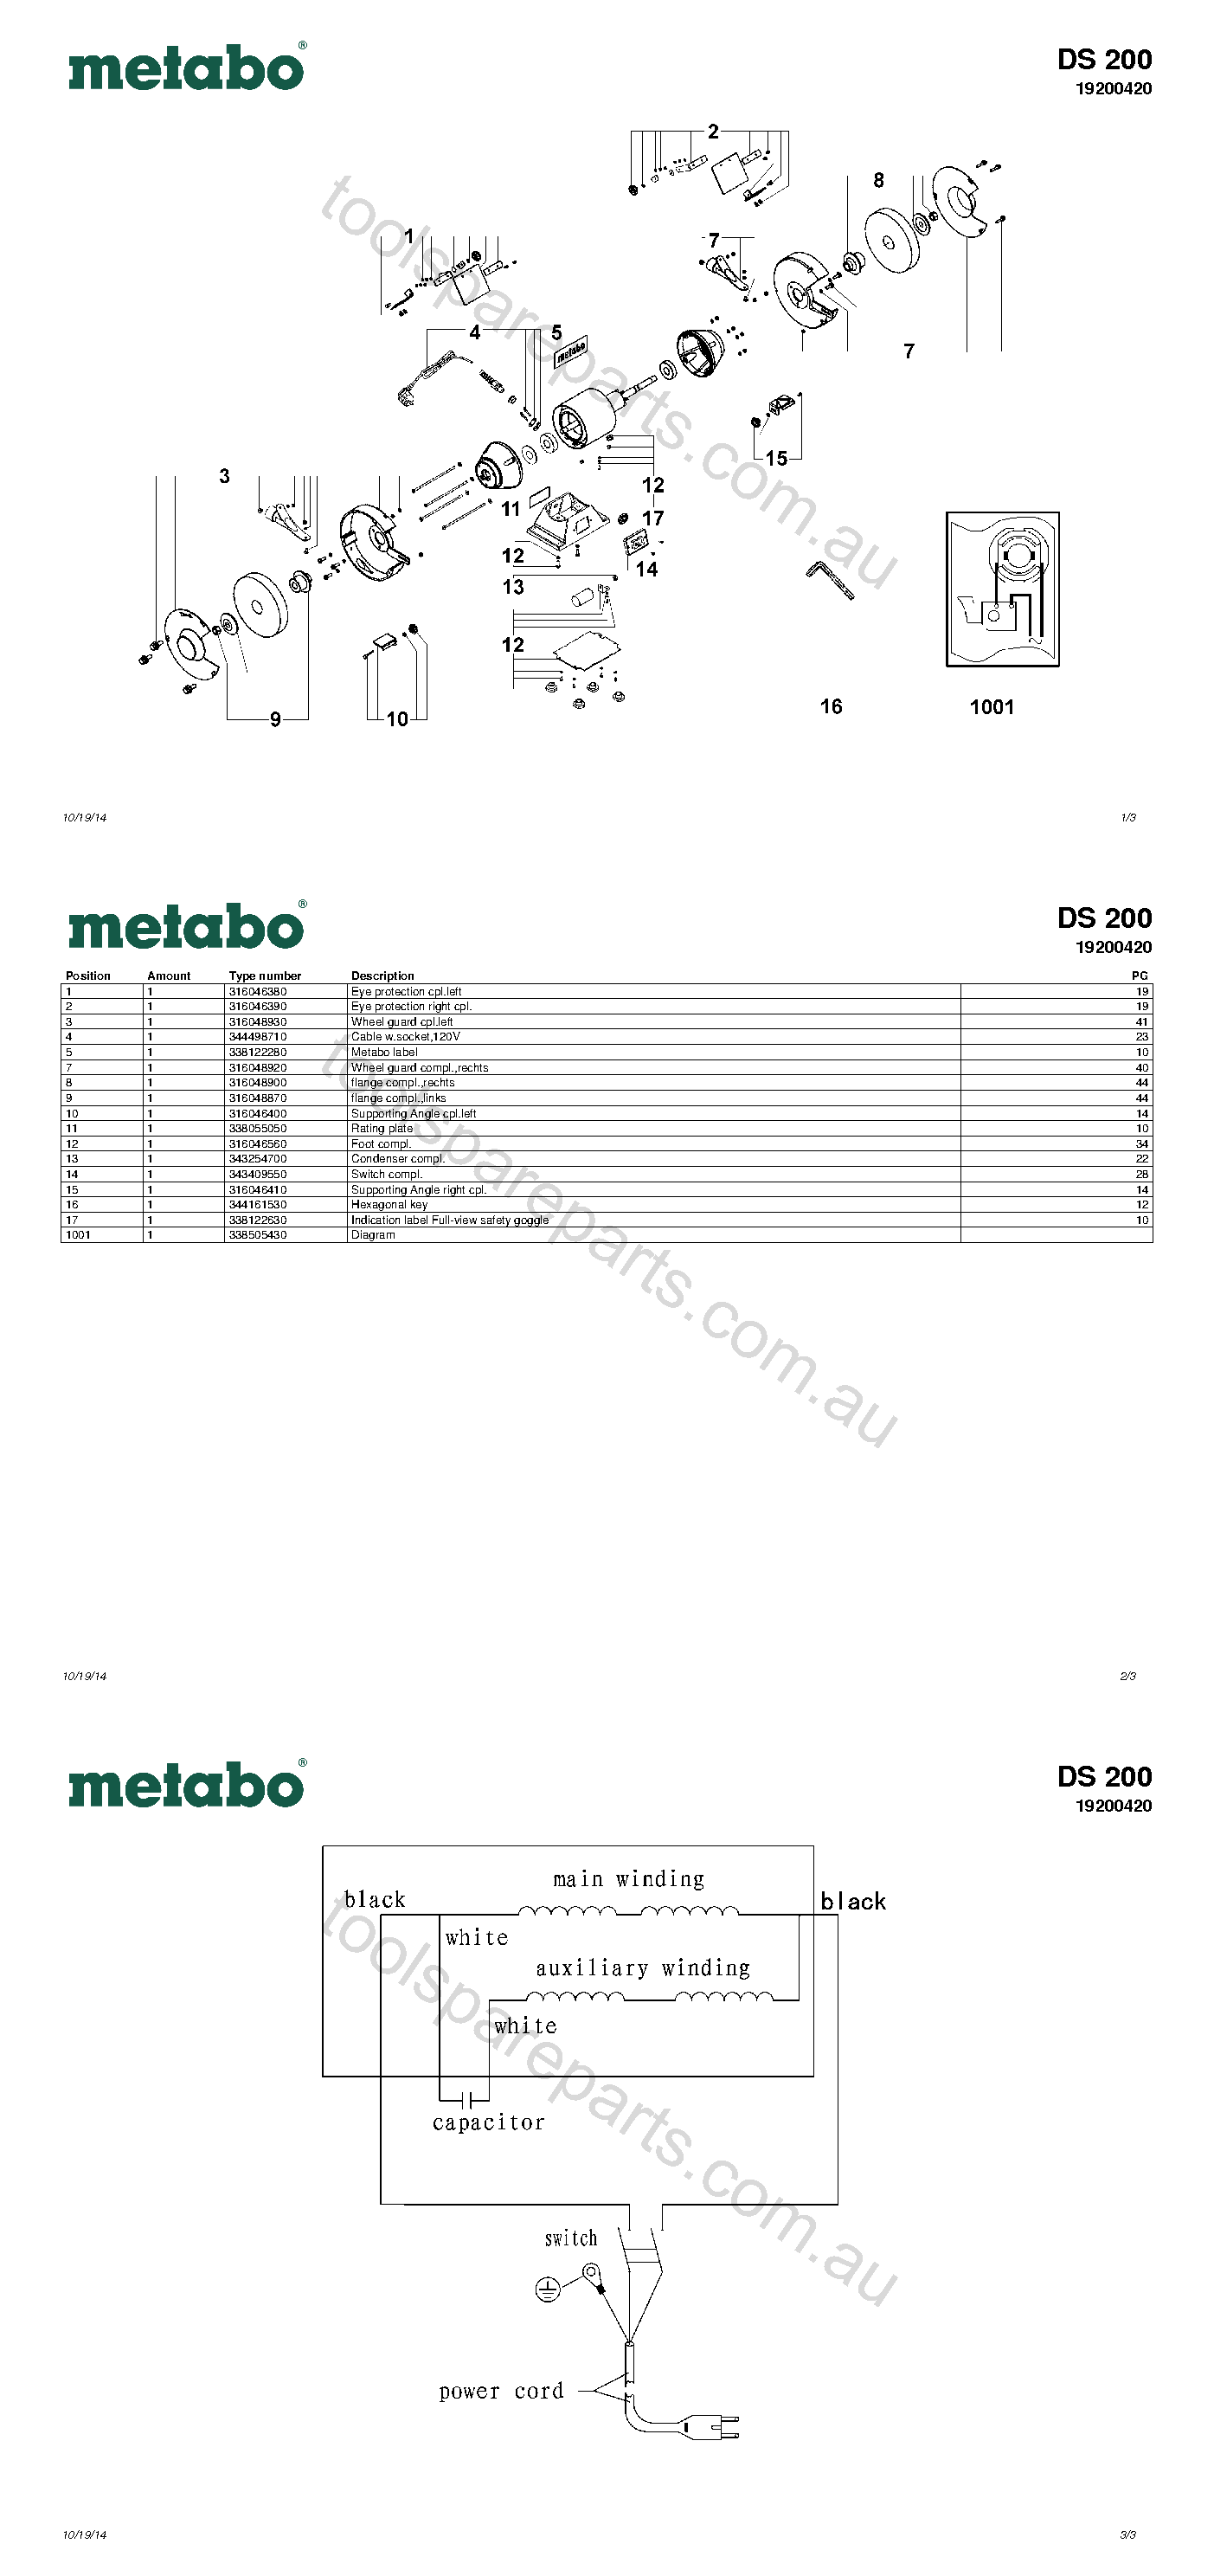 Metabo DS 200 19200420  Diagram 1